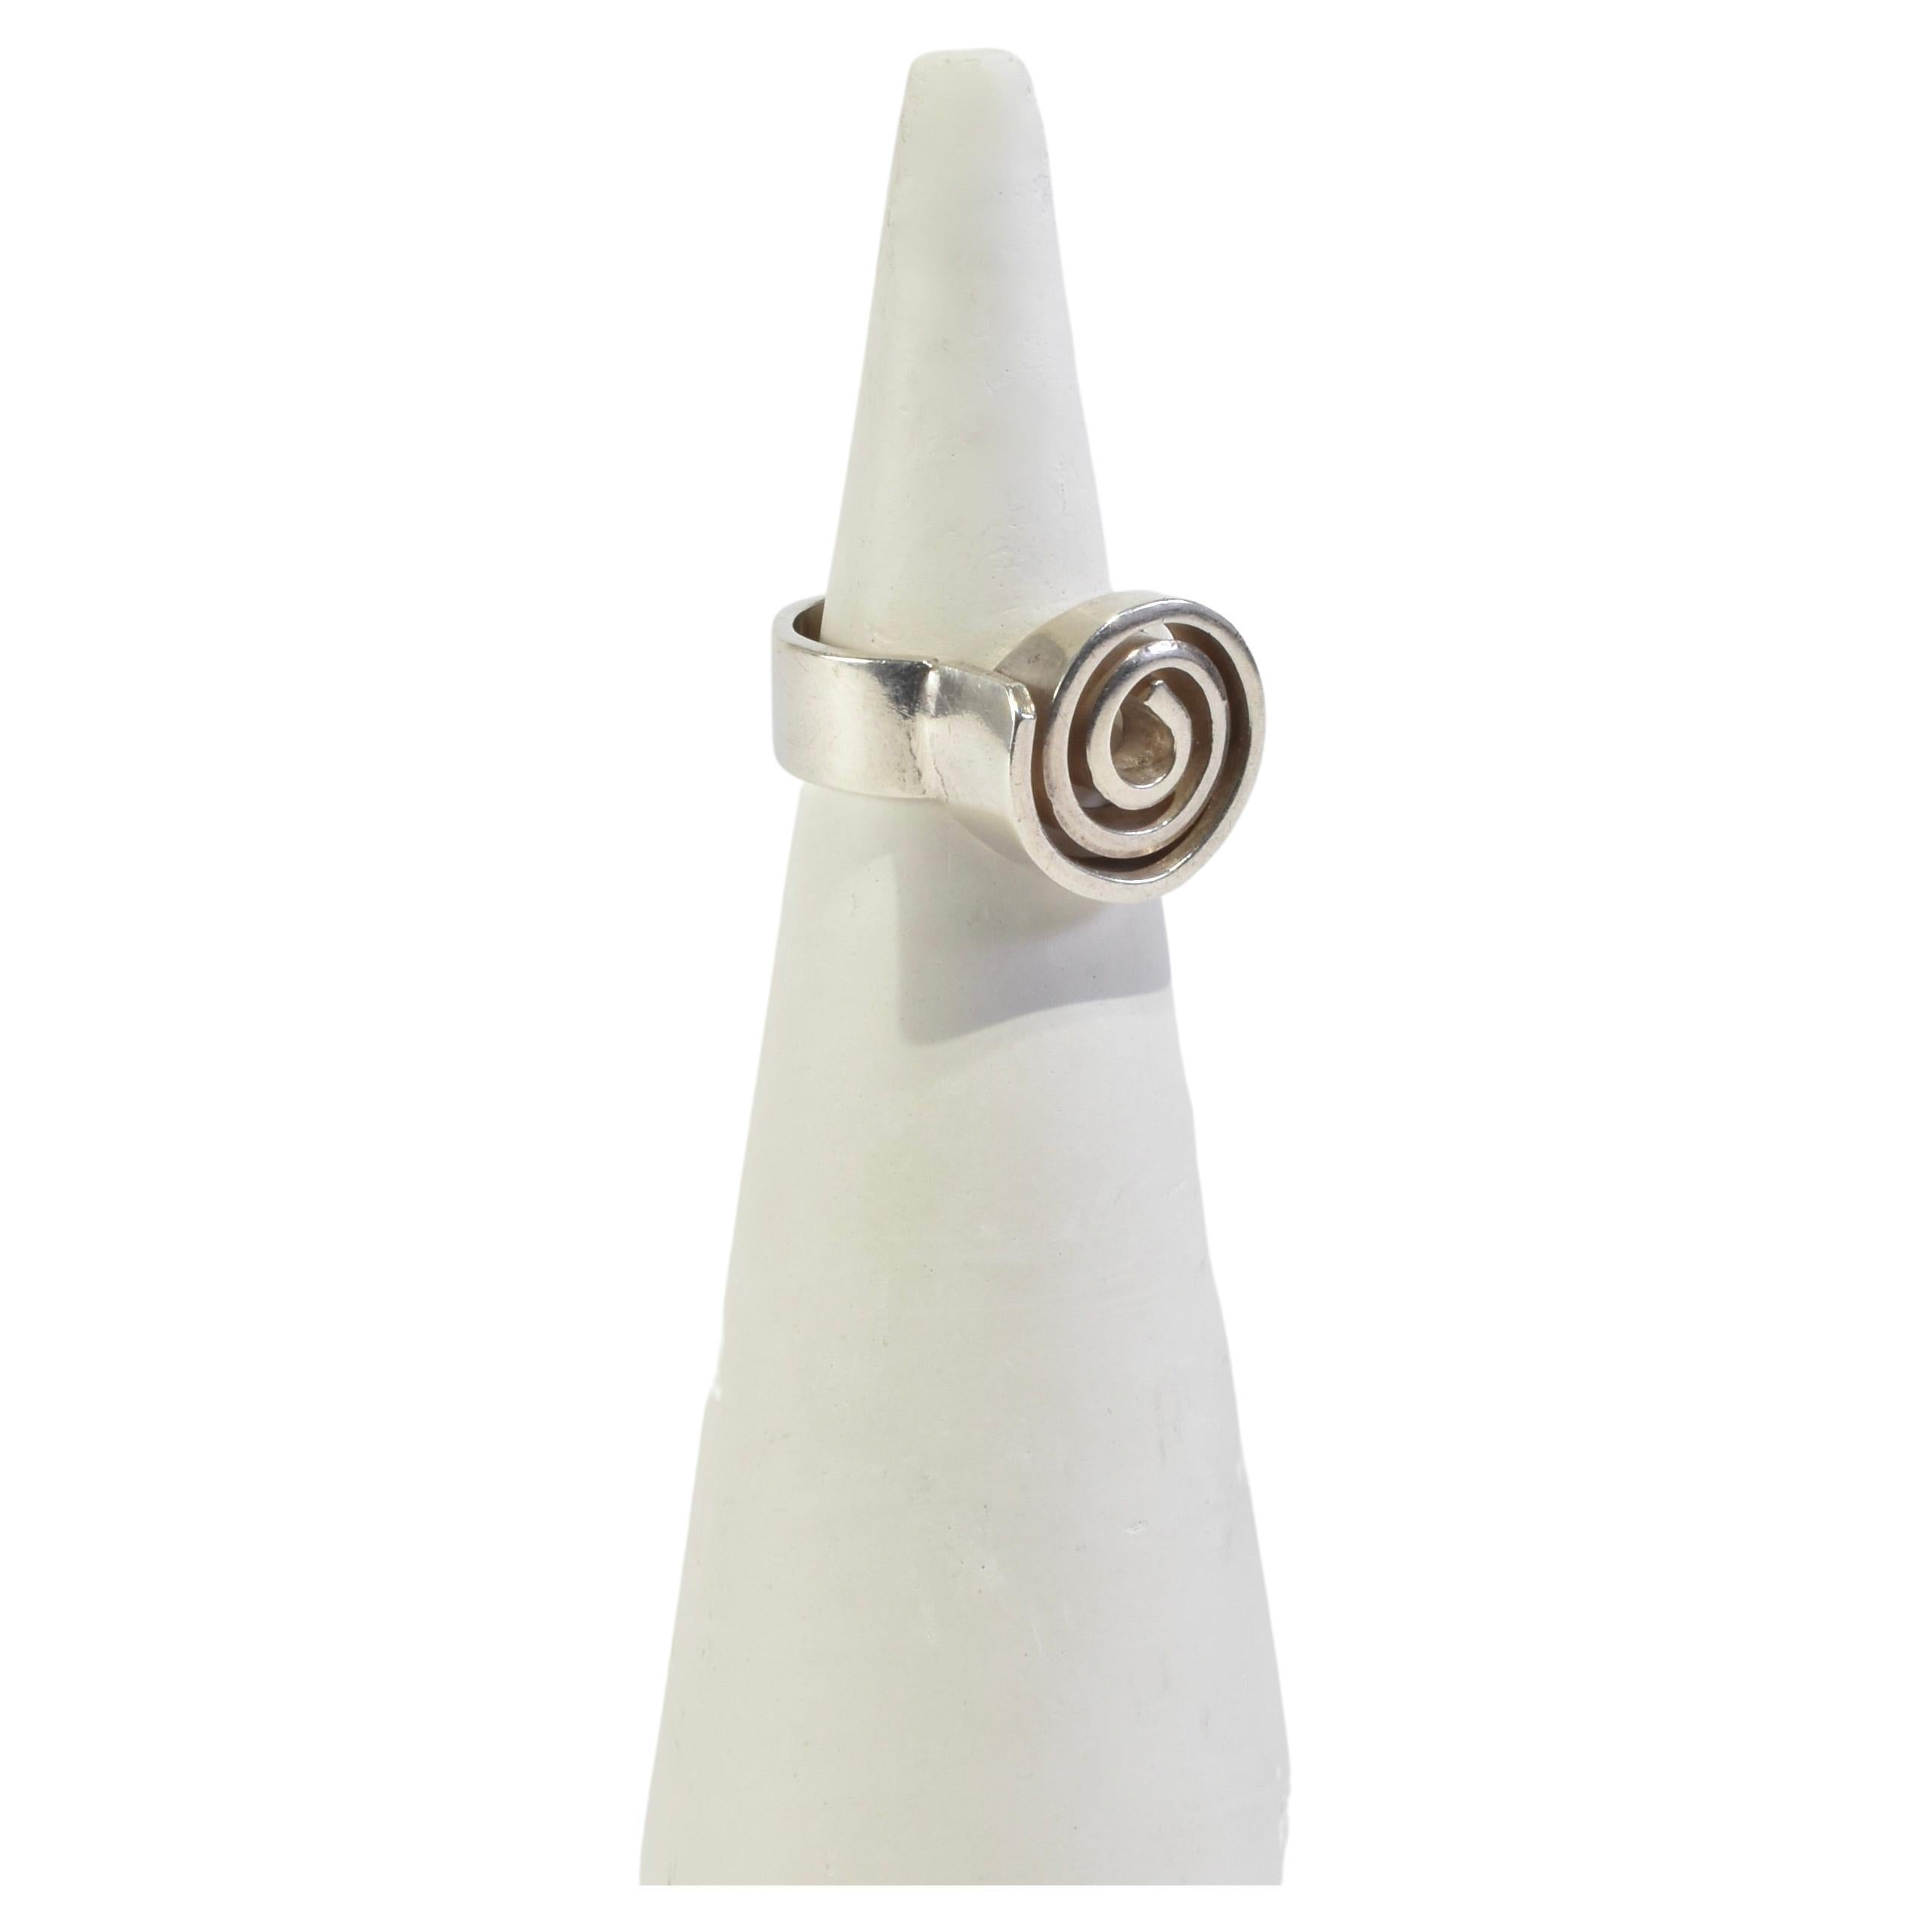 STERLING SILVER 925 Big Wide Spiral Statement Ring Plus Size - Shendell's  Ladies Rings